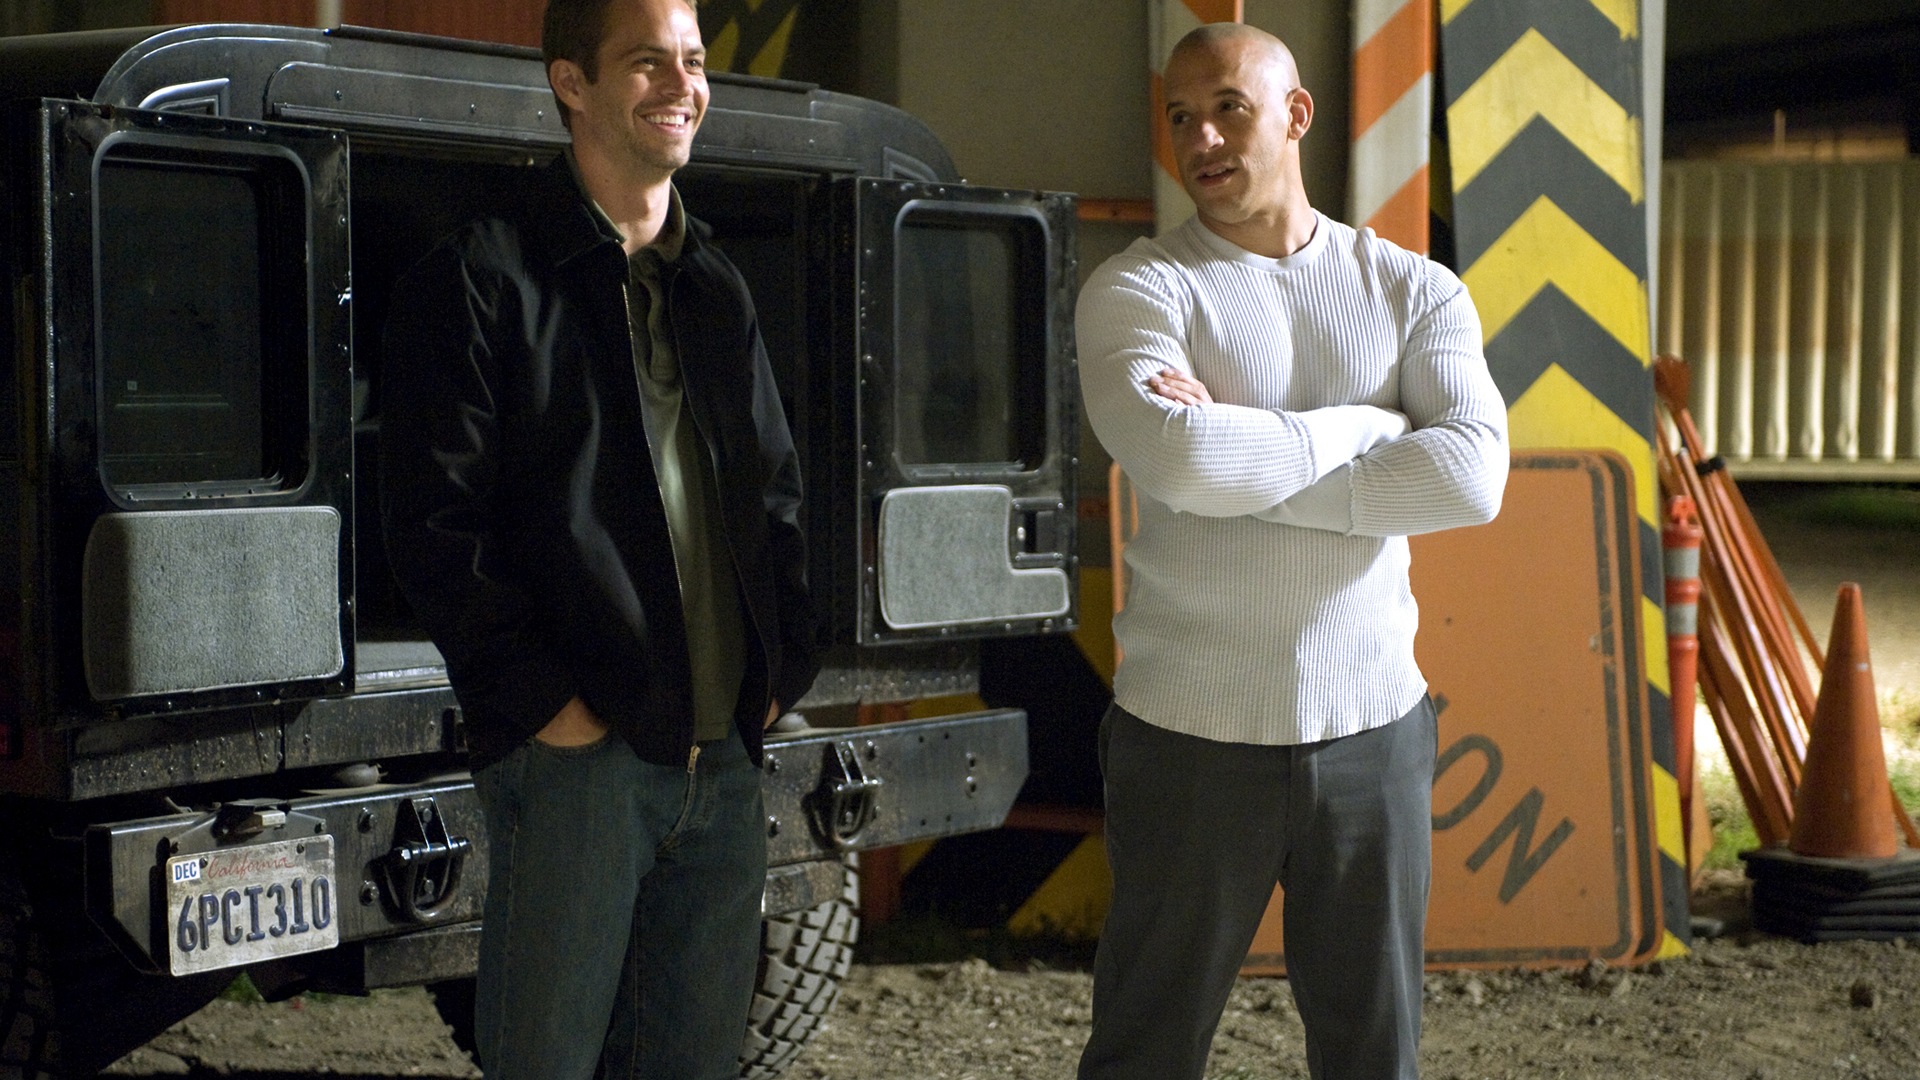 Fast and Furious 7 HD movie wallpapers #6 - 1920x1080